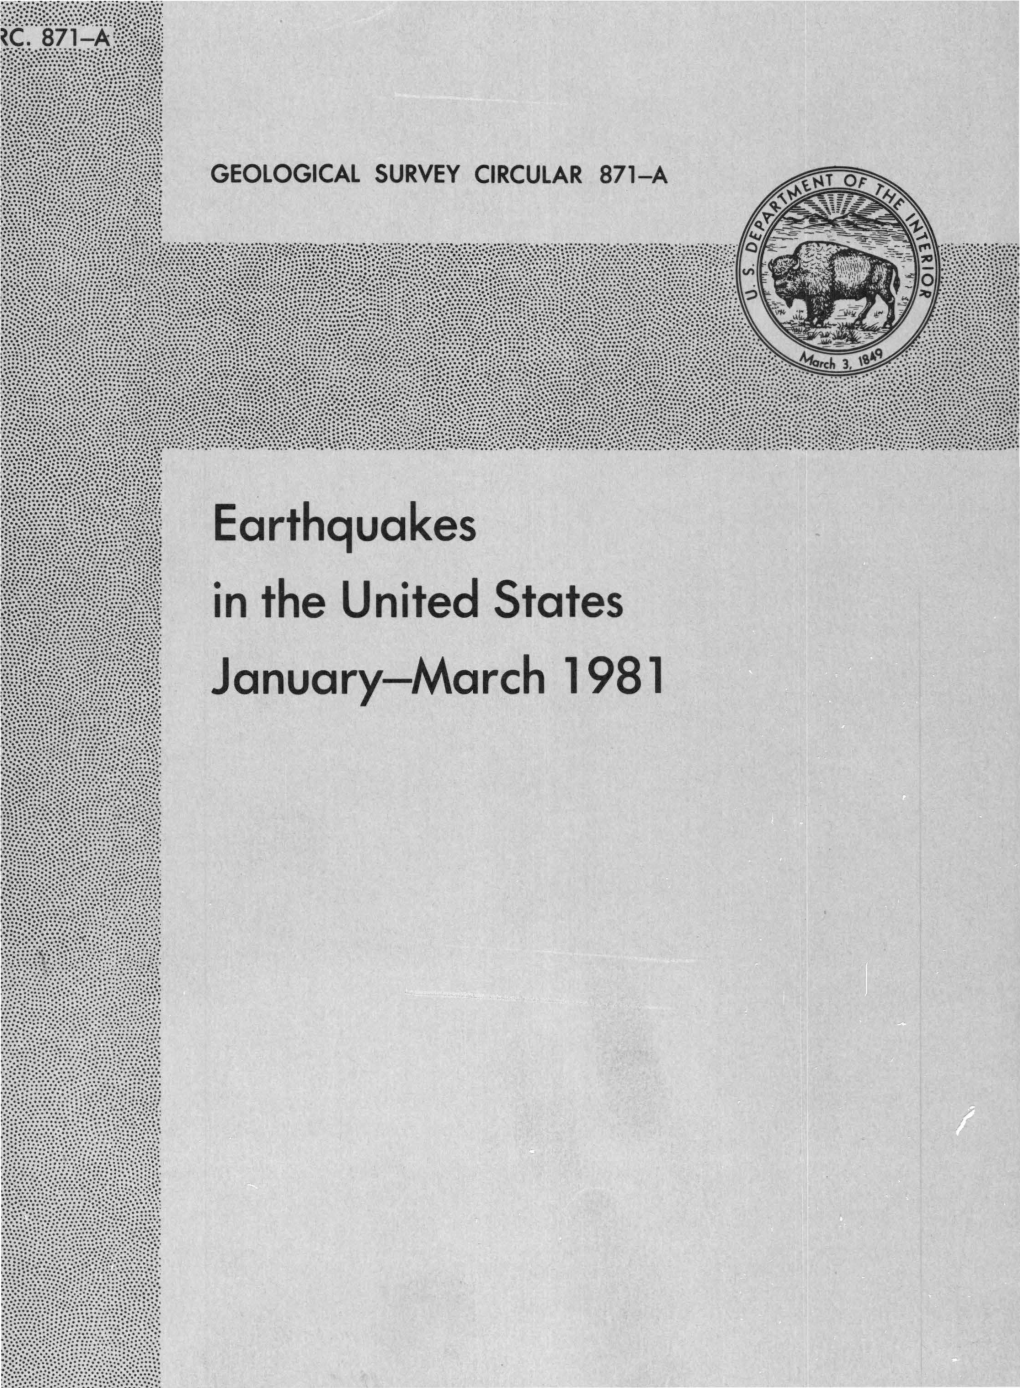 Earthquakes in the United States January-March 1981